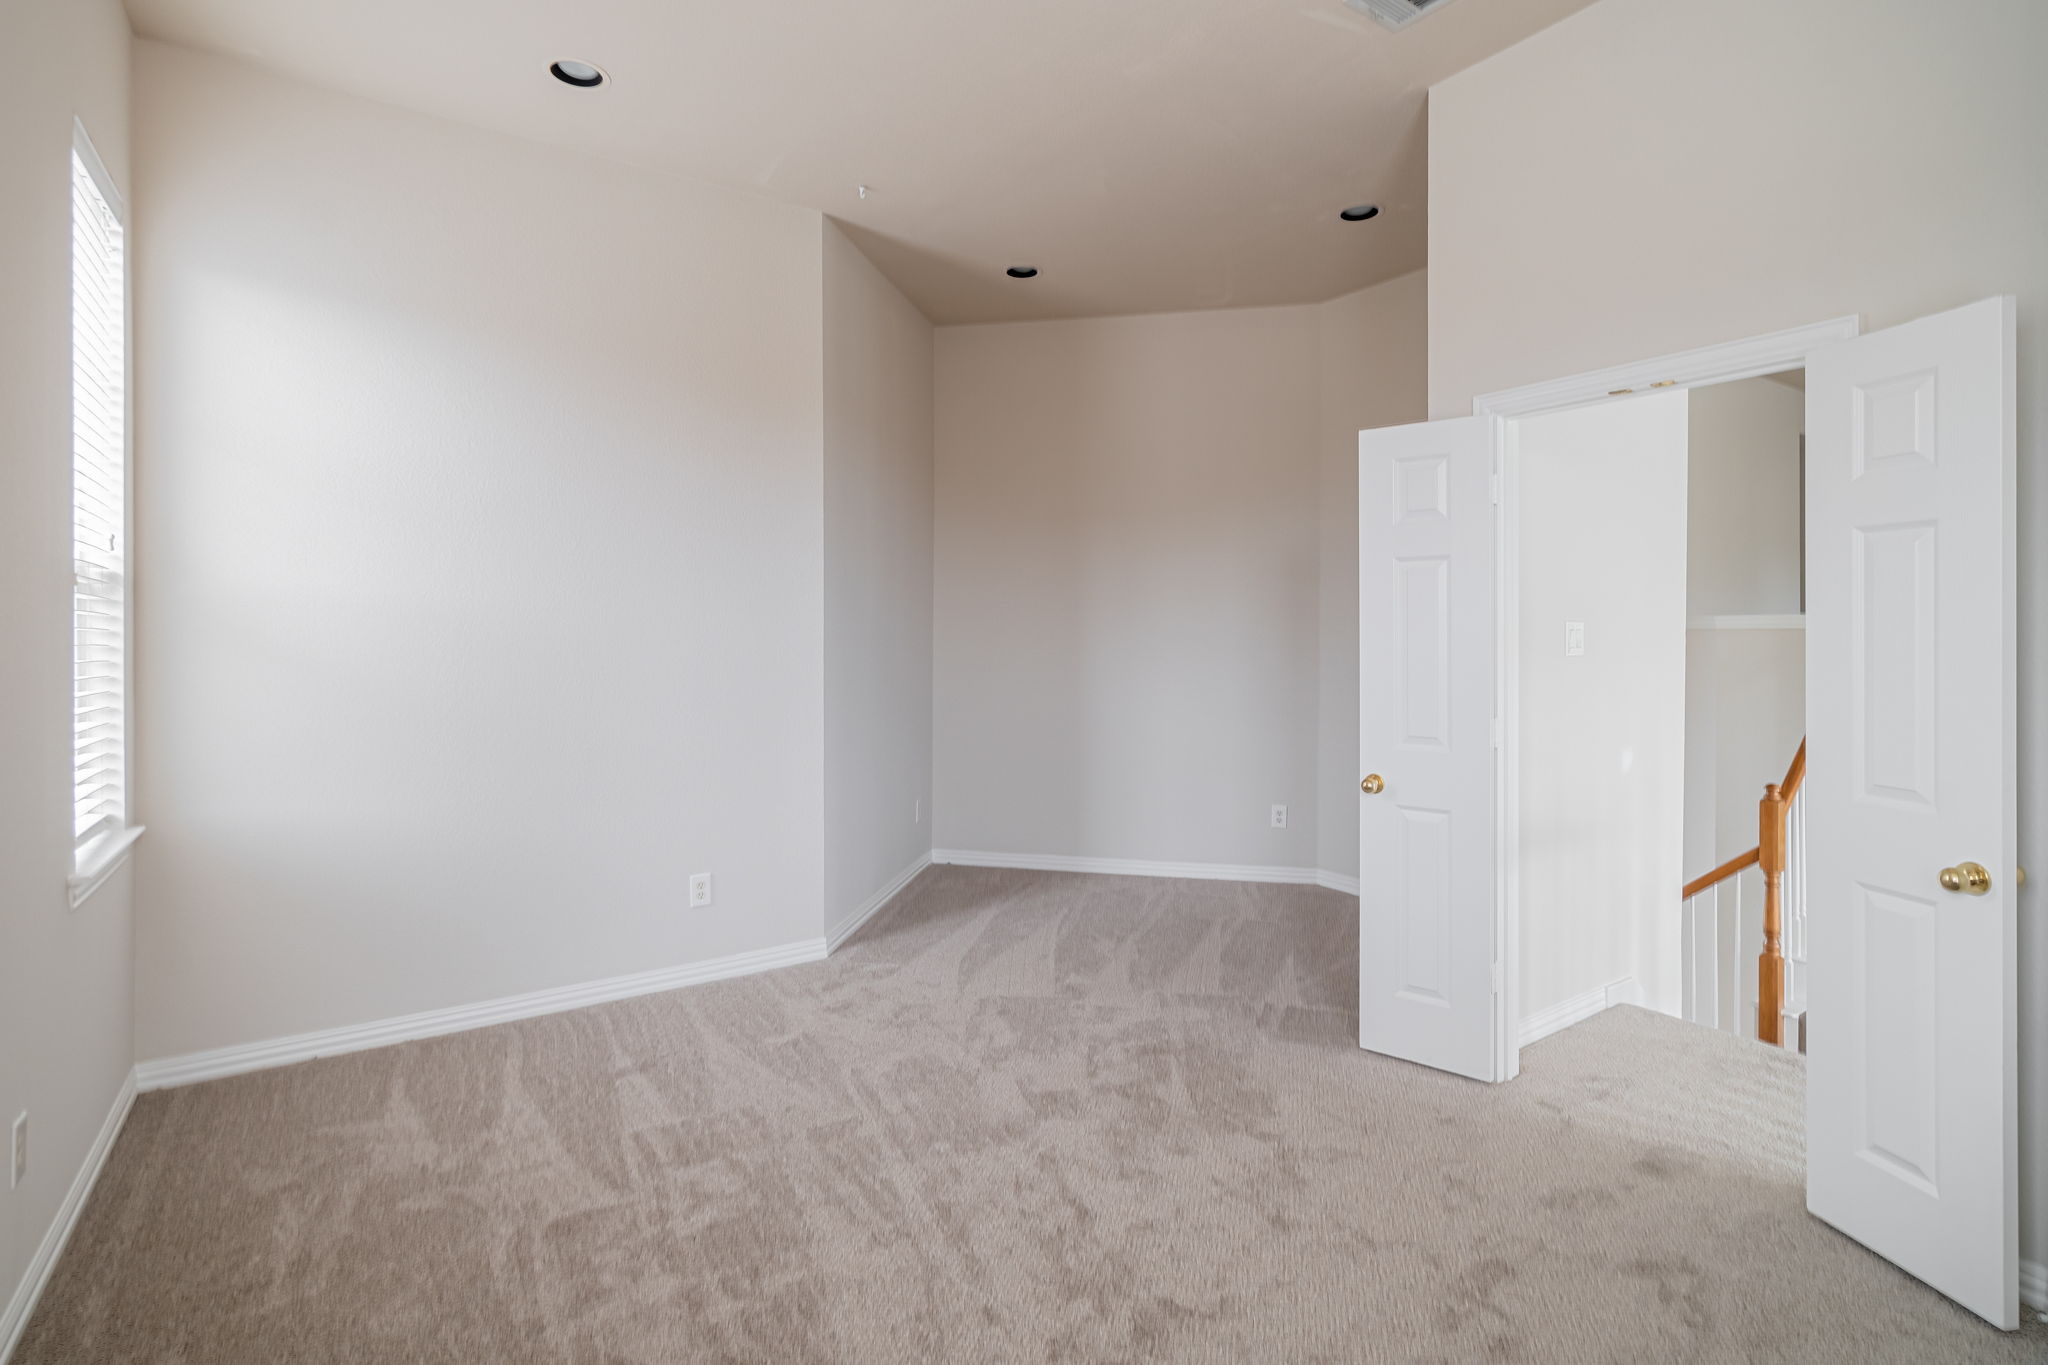    Private Media Room or Flex Space for Crafts Exercies or Play Room 